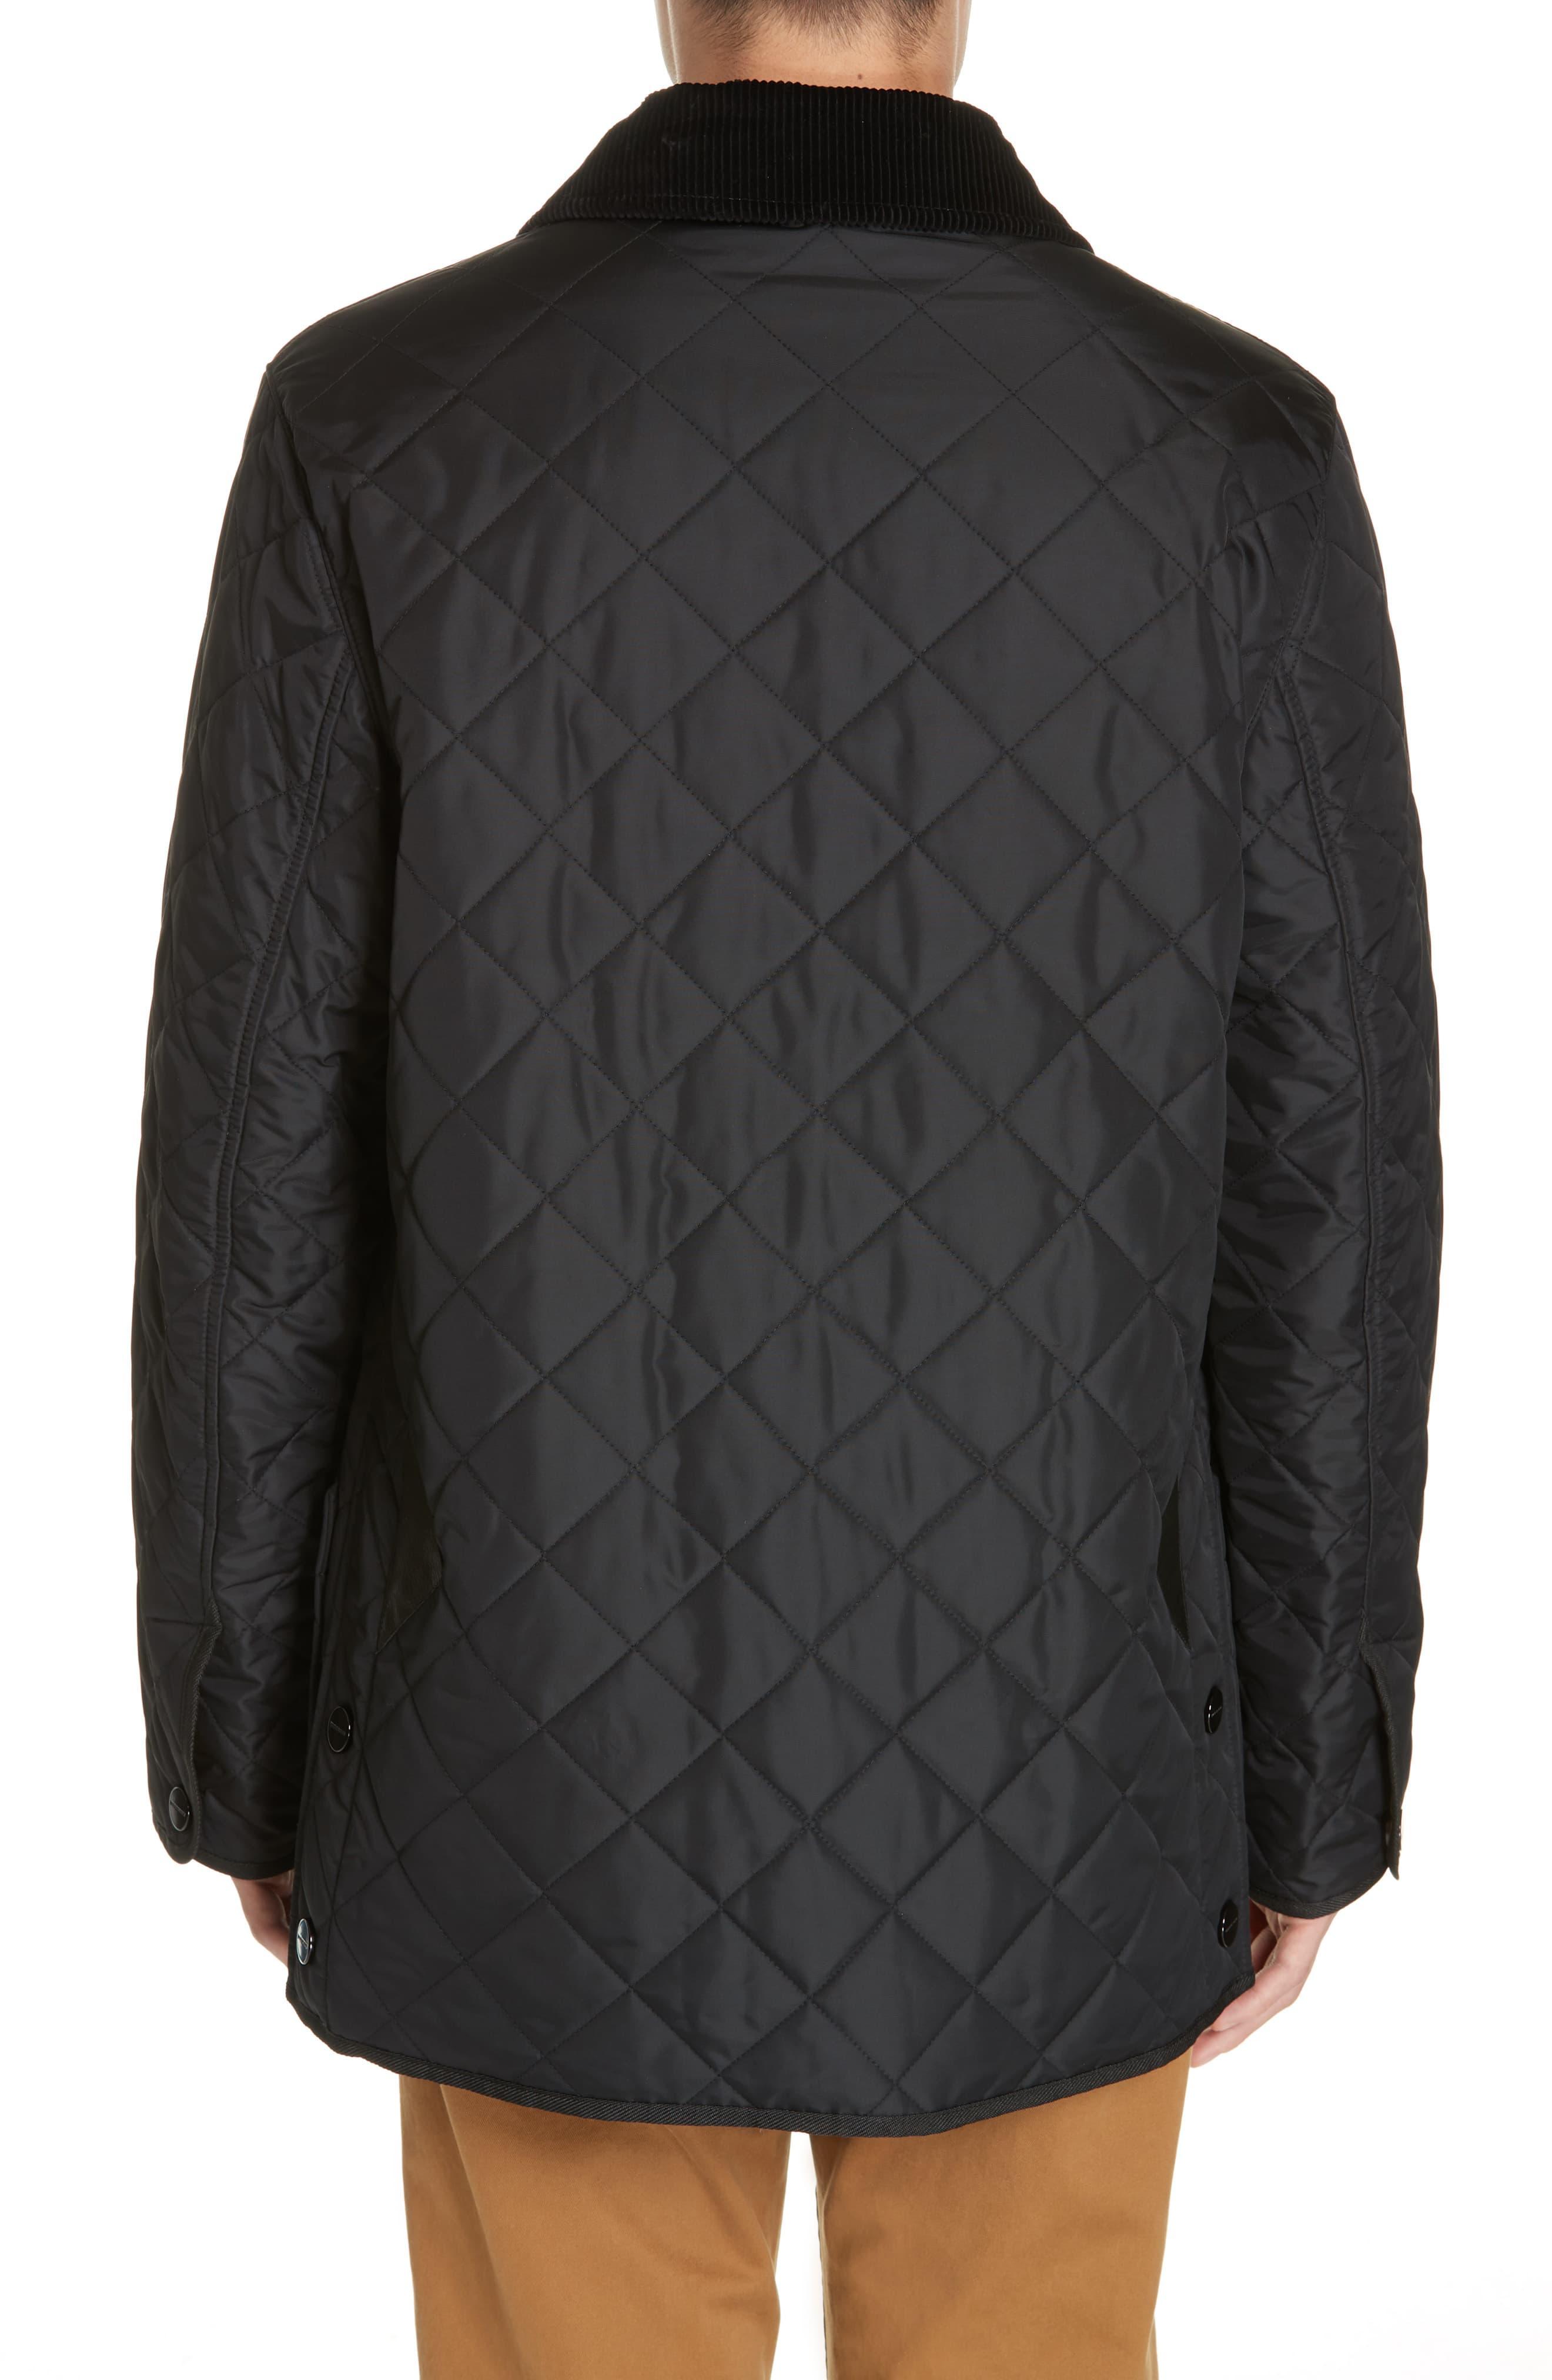 Burberry Corduroy Cotswold Quilted Jacket in Black for Men - Lyst